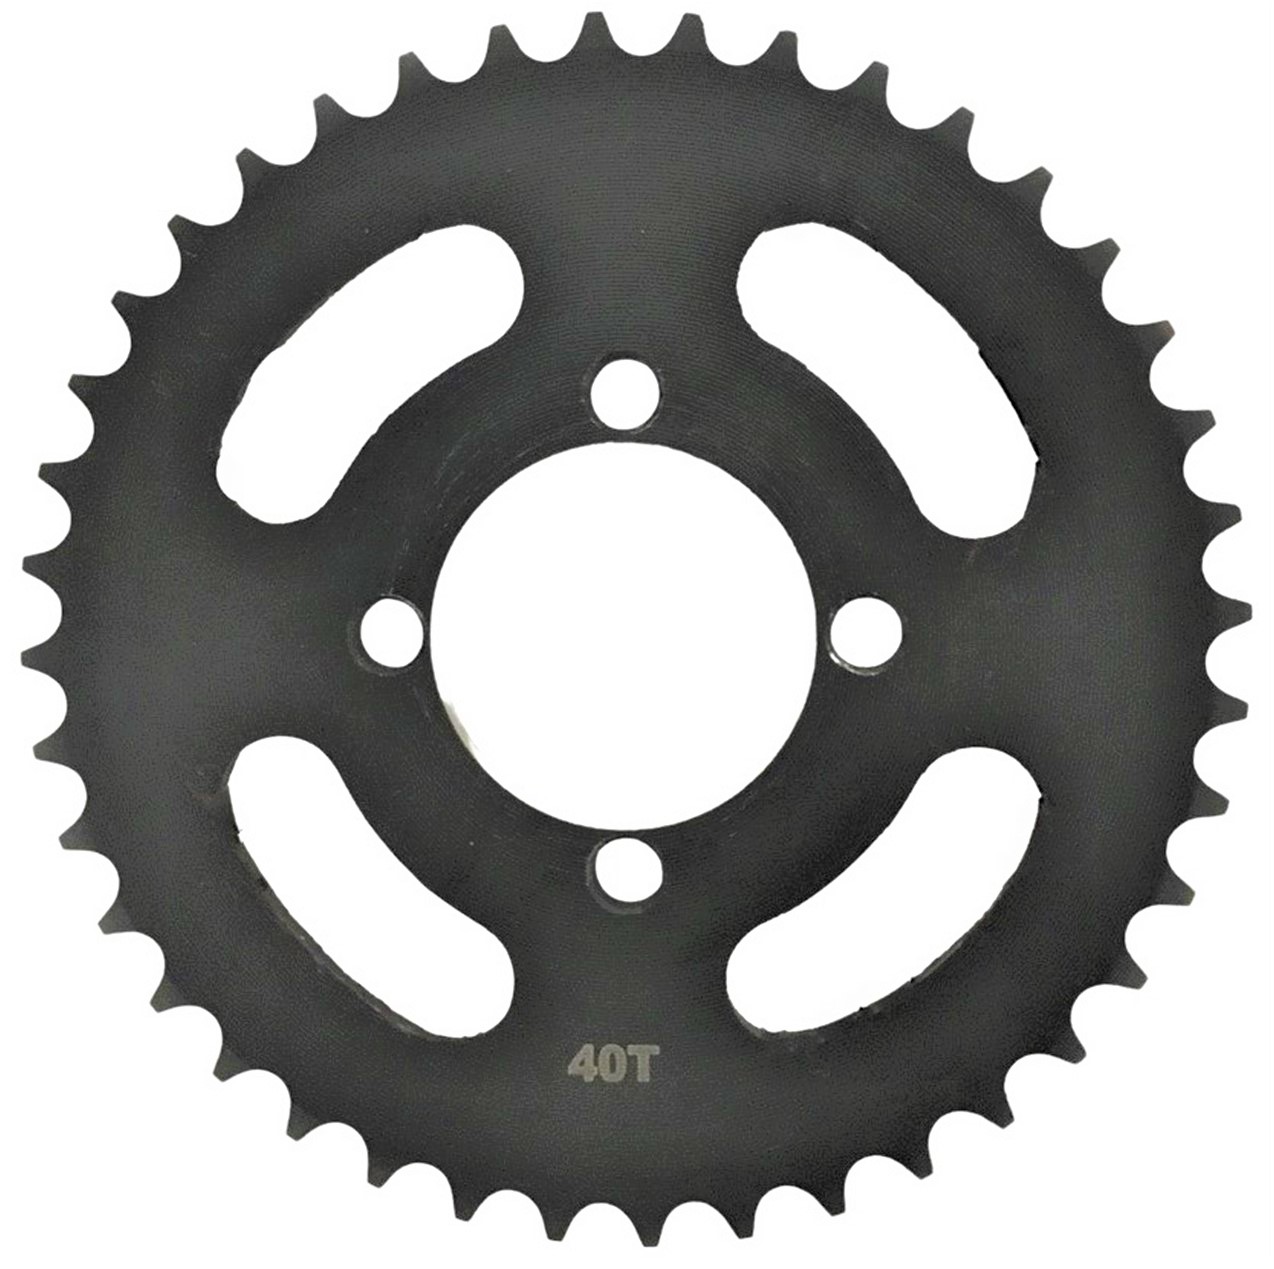 Rear Sprocket #35 40TH Fits Coleman CK100, GK80, Motovox, + other small GoKarts - Click Image to Close